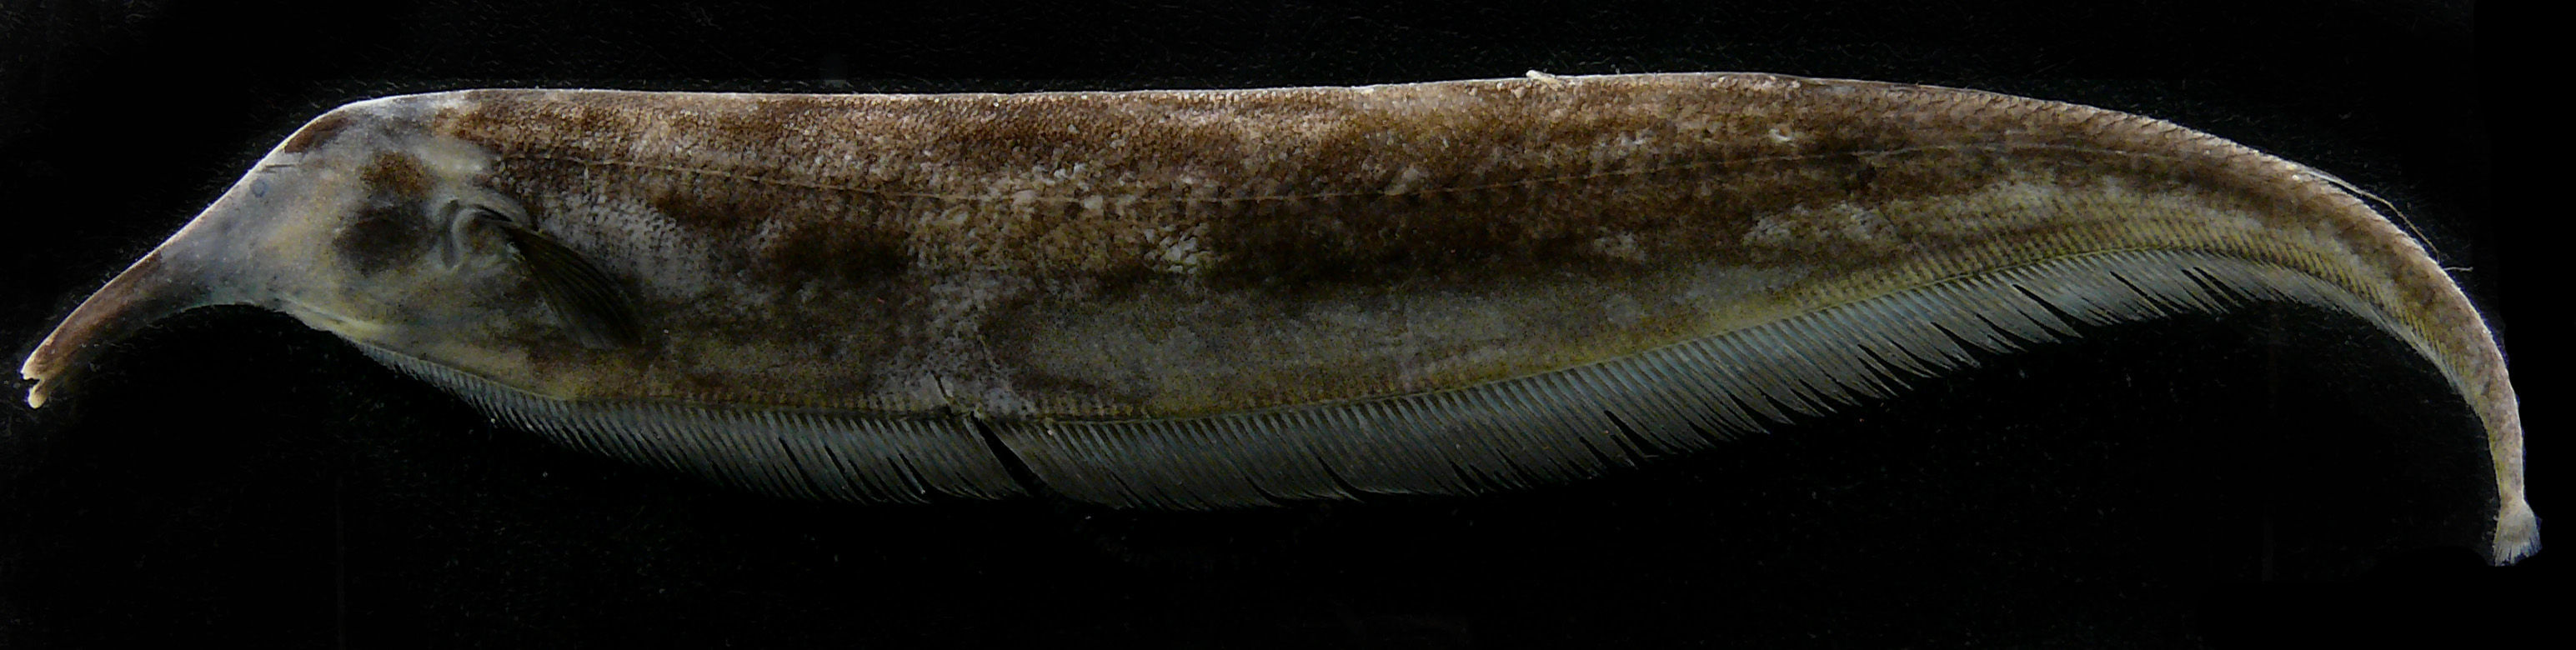 Image of Stewart’s tube-snouted ghost knifefish